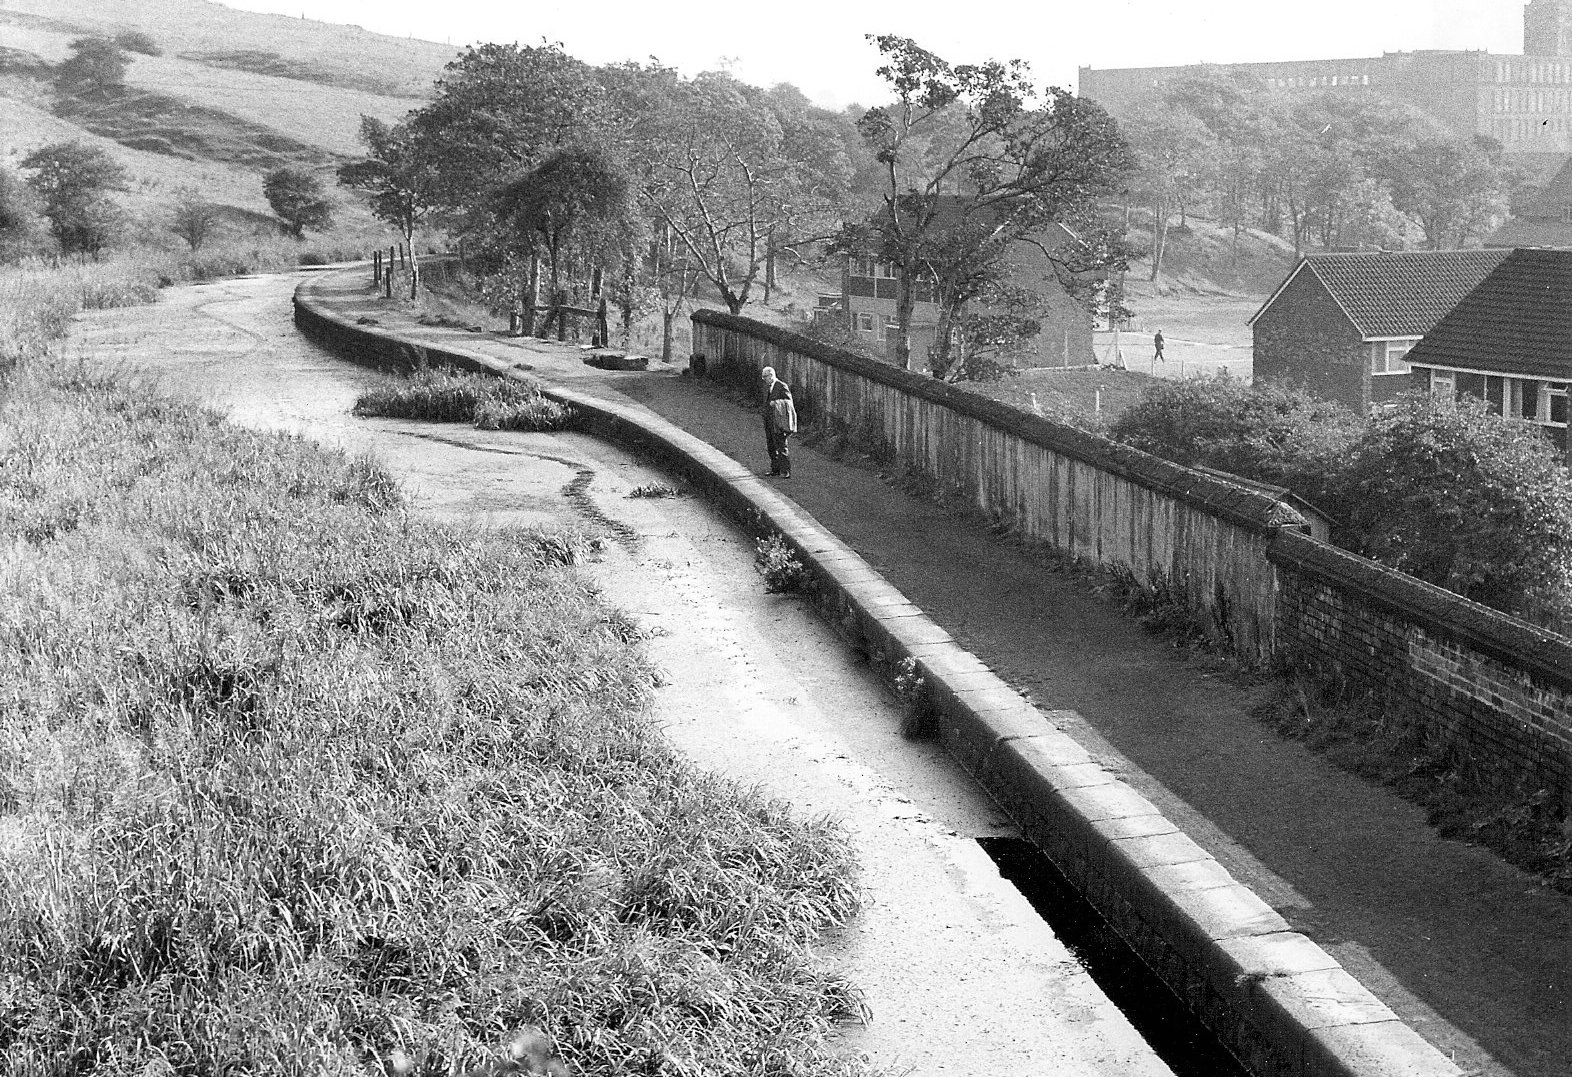 The canal at Prestolee with Irwell Bank Mill in the background (about 1965)